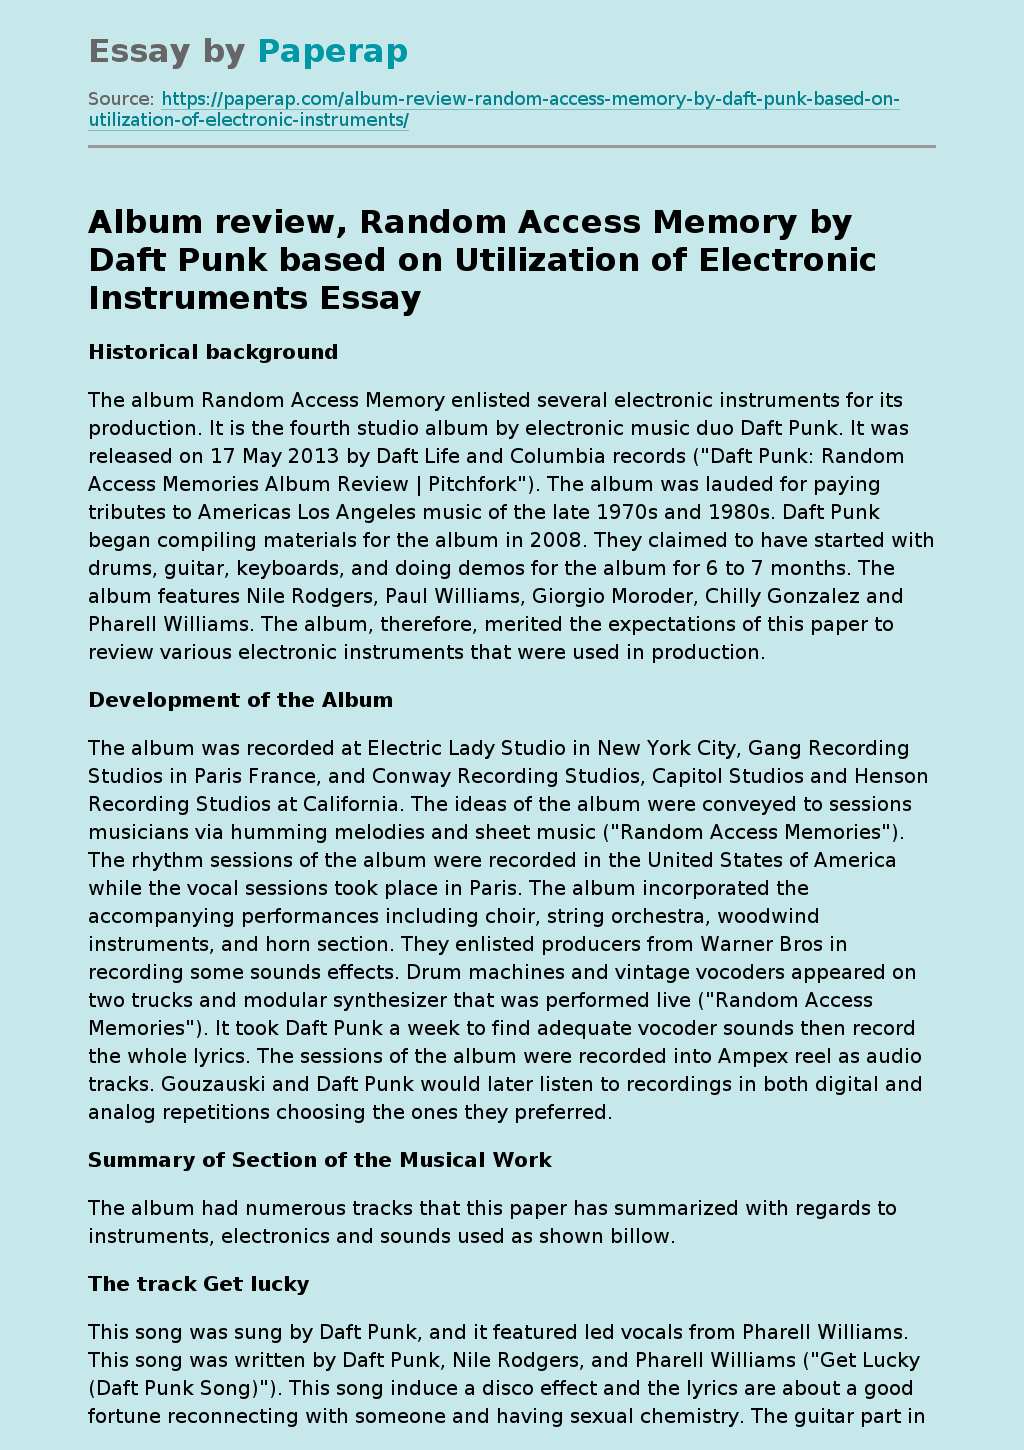 Album review, Random Access Memory by Daft Punk based on Utilization of Electronic Instruments